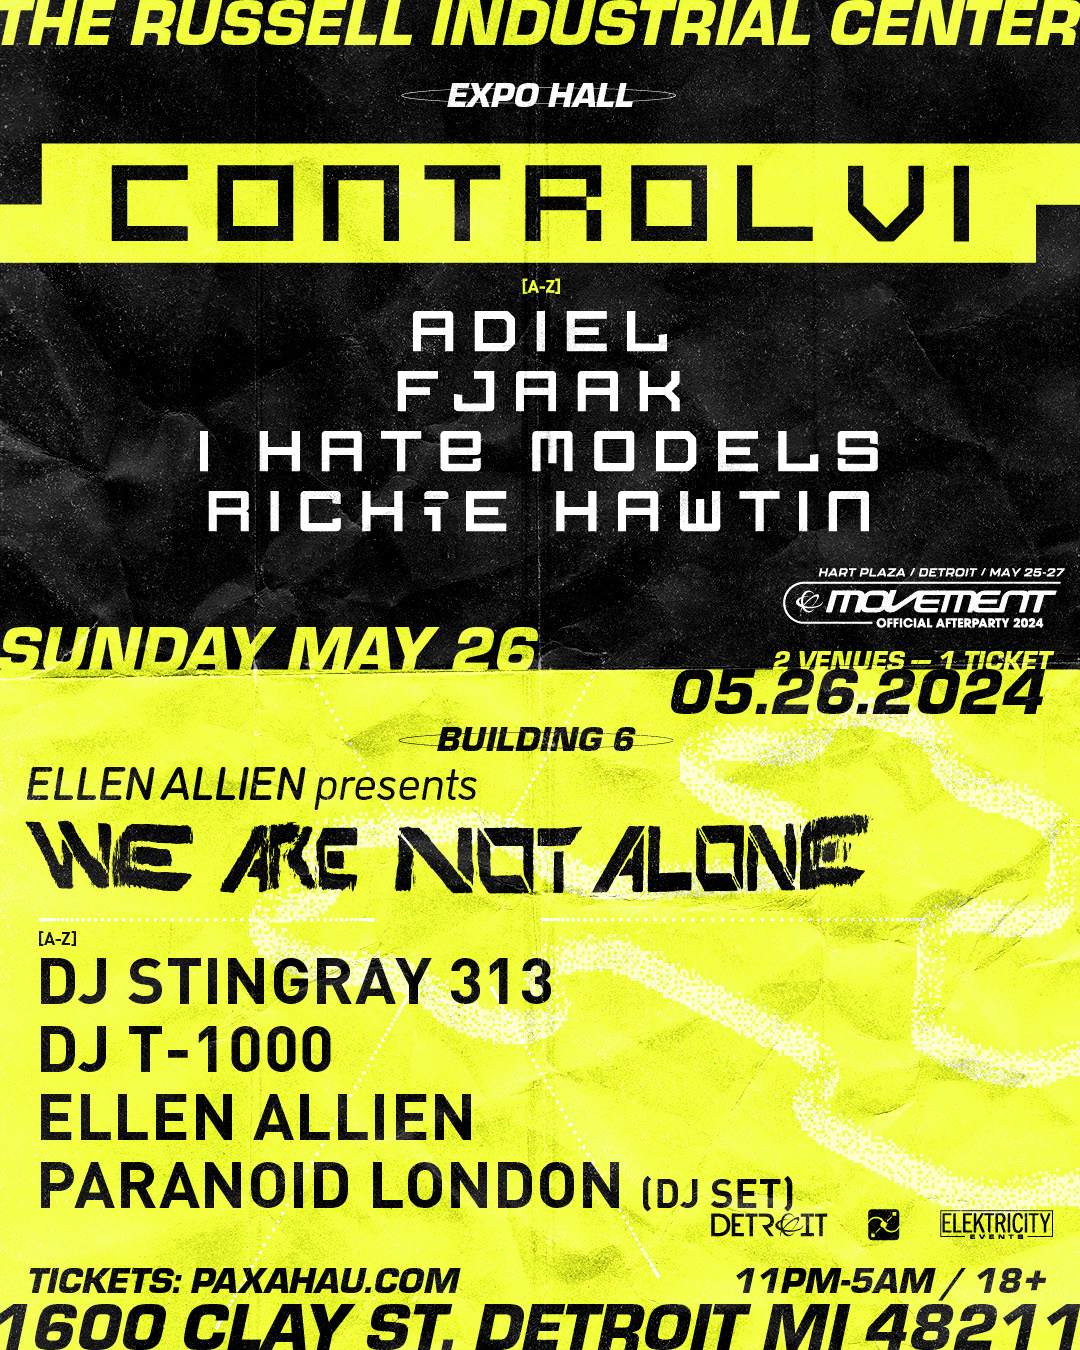 Control VI & We Are Not Alone - Official Movement Afterparty - フライヤー表